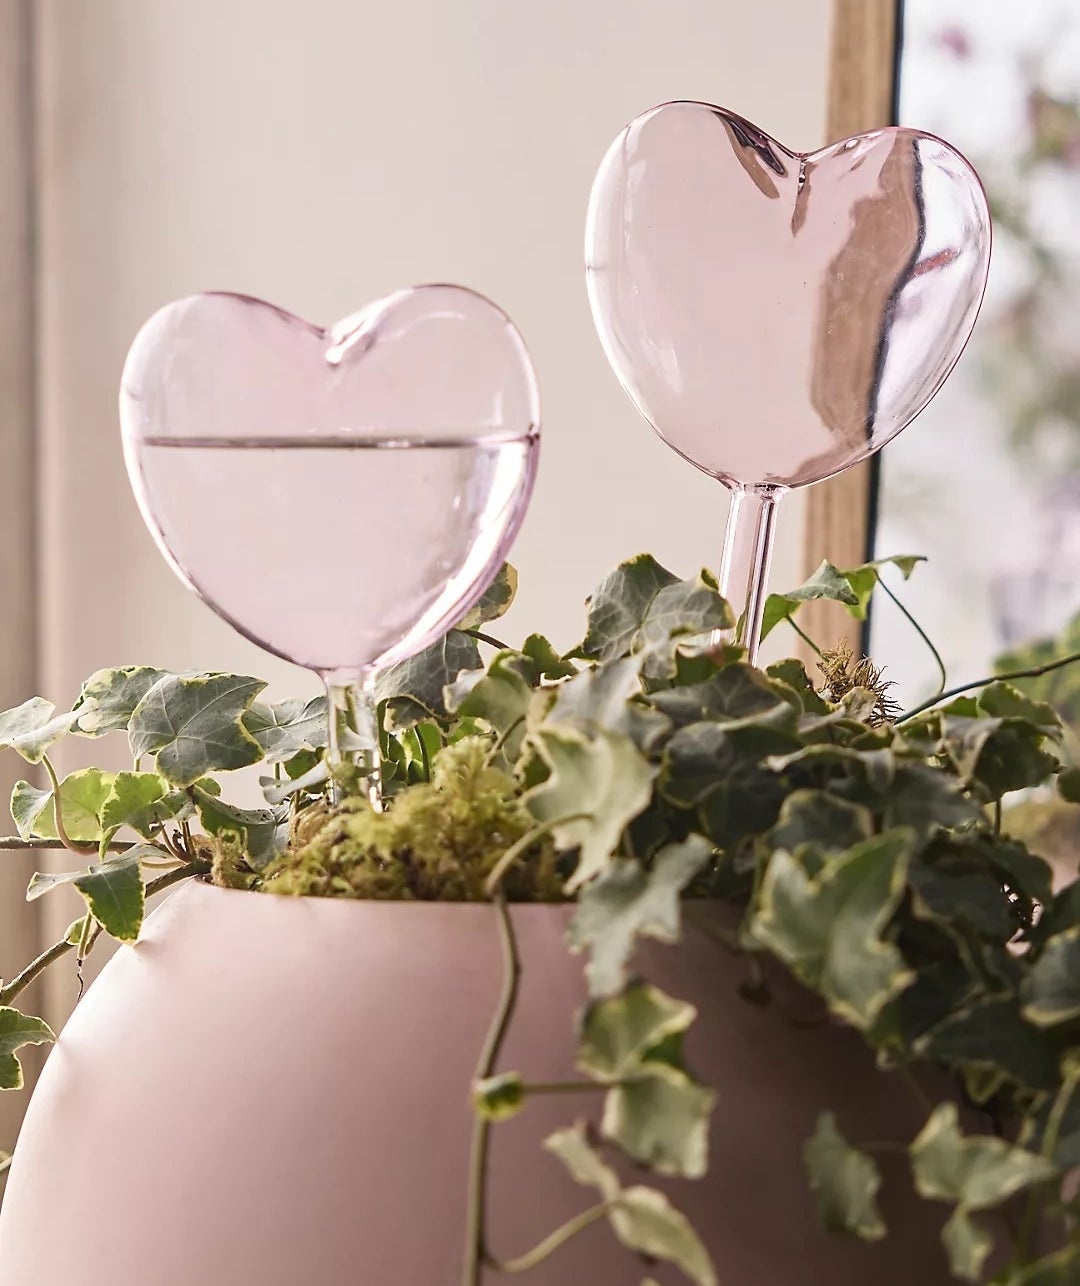 Two heart-shaped glasses in a pink vase with ivy, suitable for romantic table setting